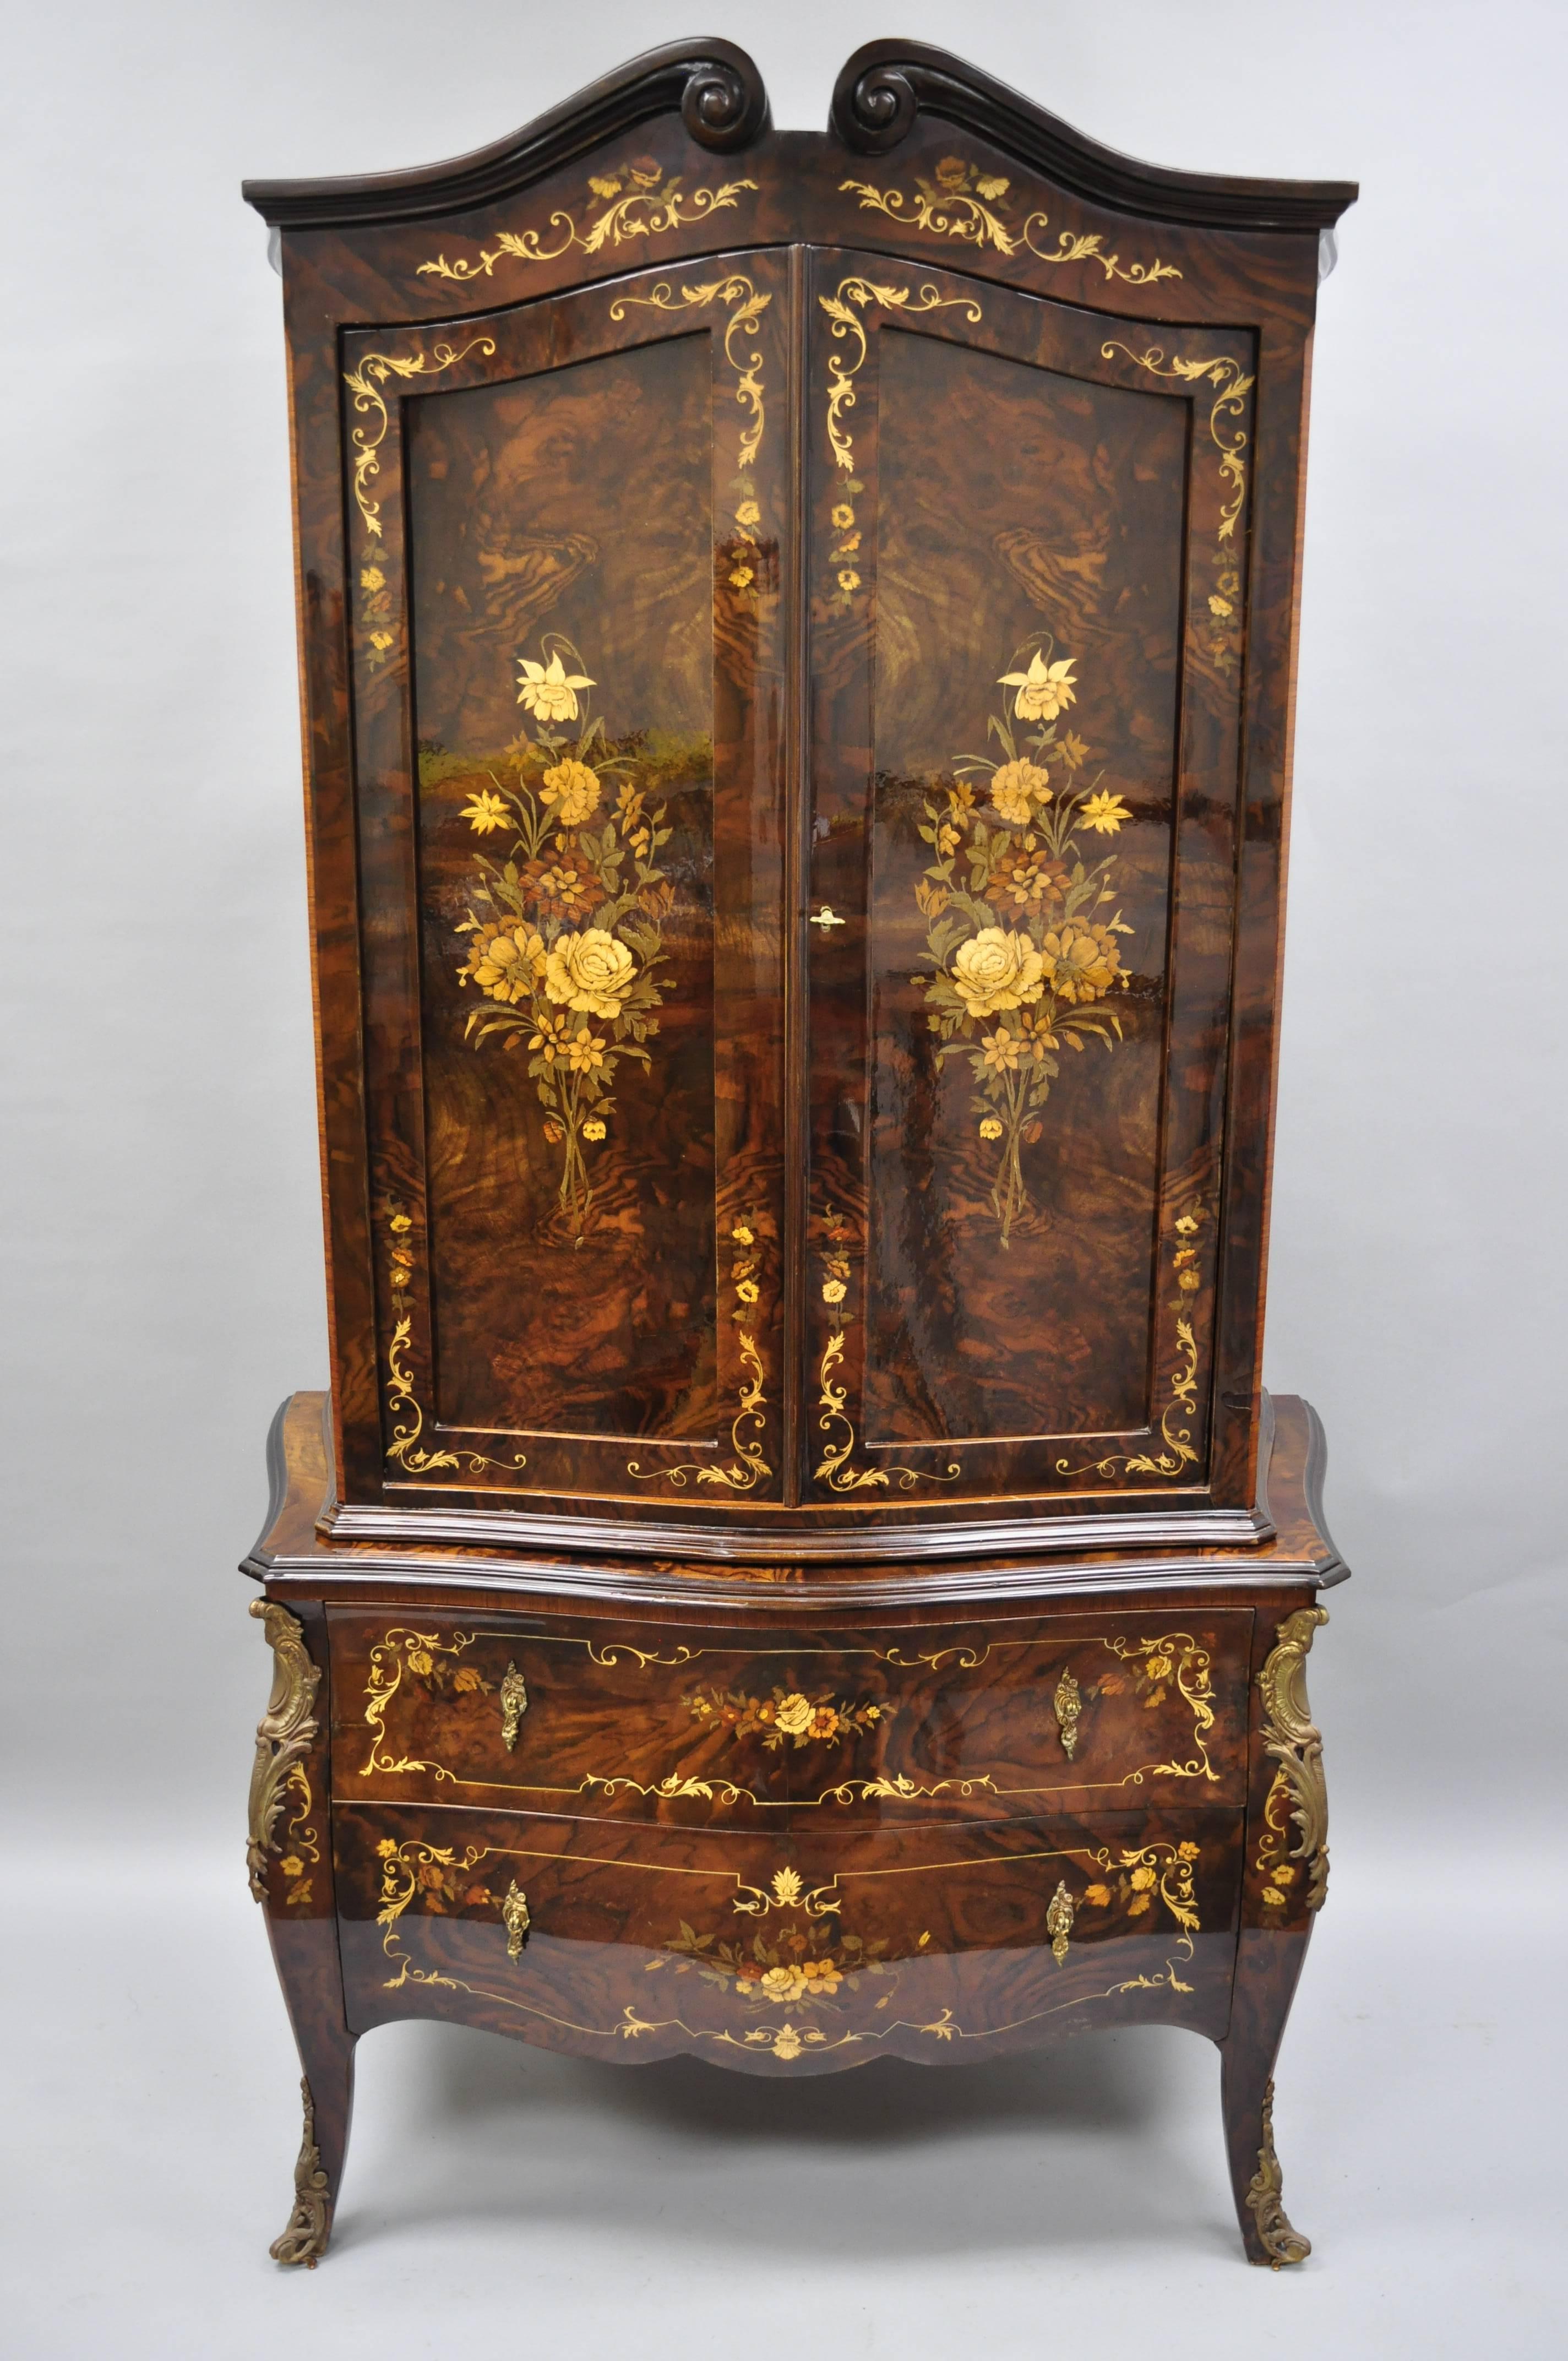 Italian inlaid bombe form armoire in the French Louis XV style by Roma Furniture in walnut briar. Armoire comes in two pieces and features beautiful floral inlay, bronze ormolu, shapely bombe form, fitted interior, cabriole legs, and stunning walnut